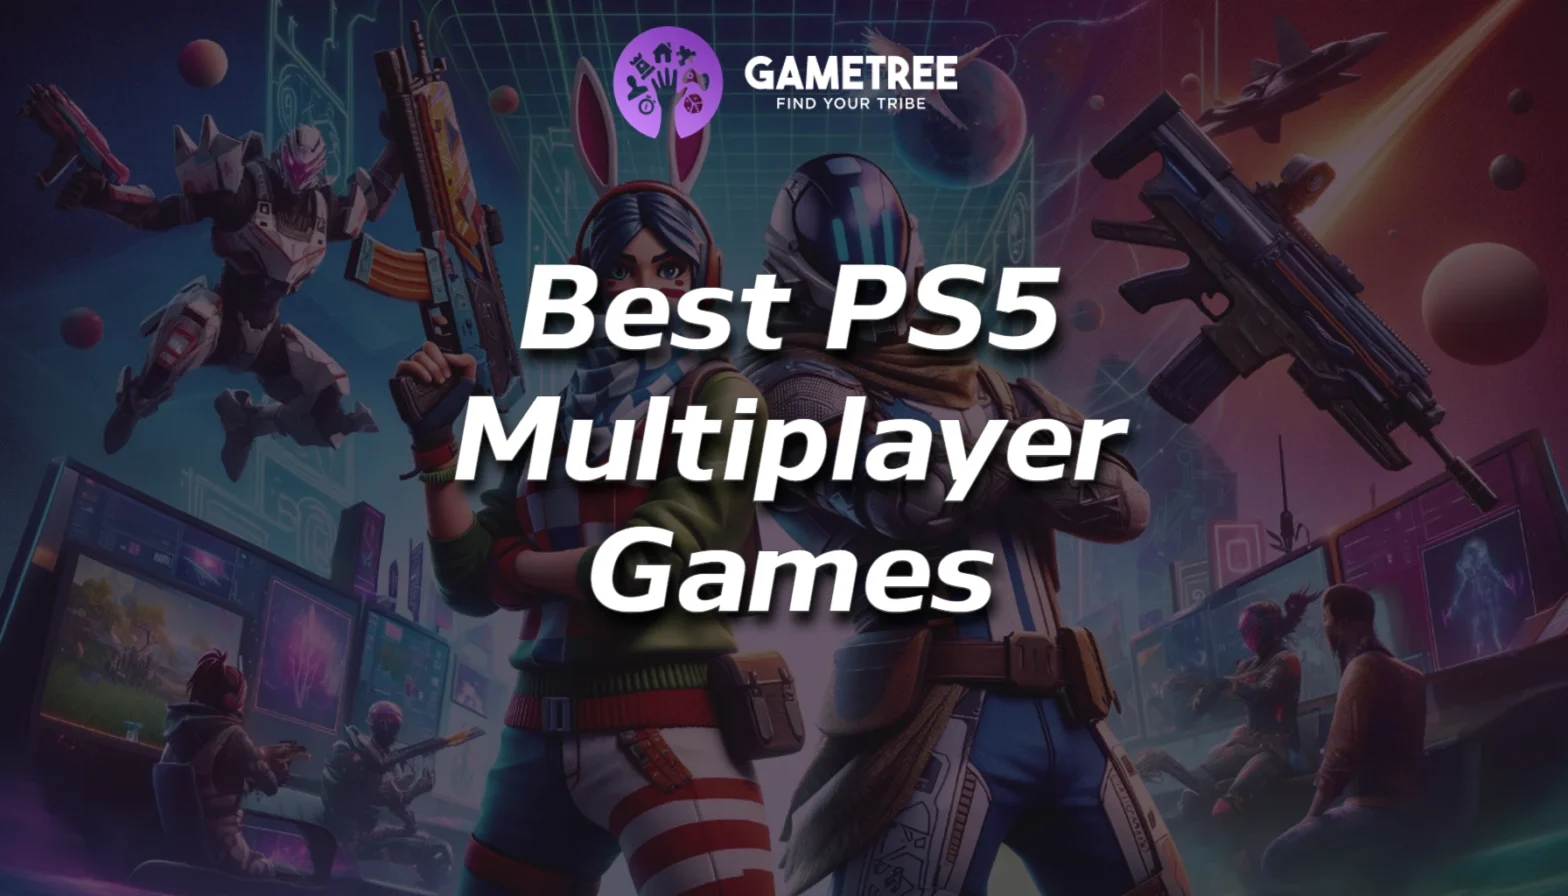 19 best PS4 games – PlayStation 4 games you must play